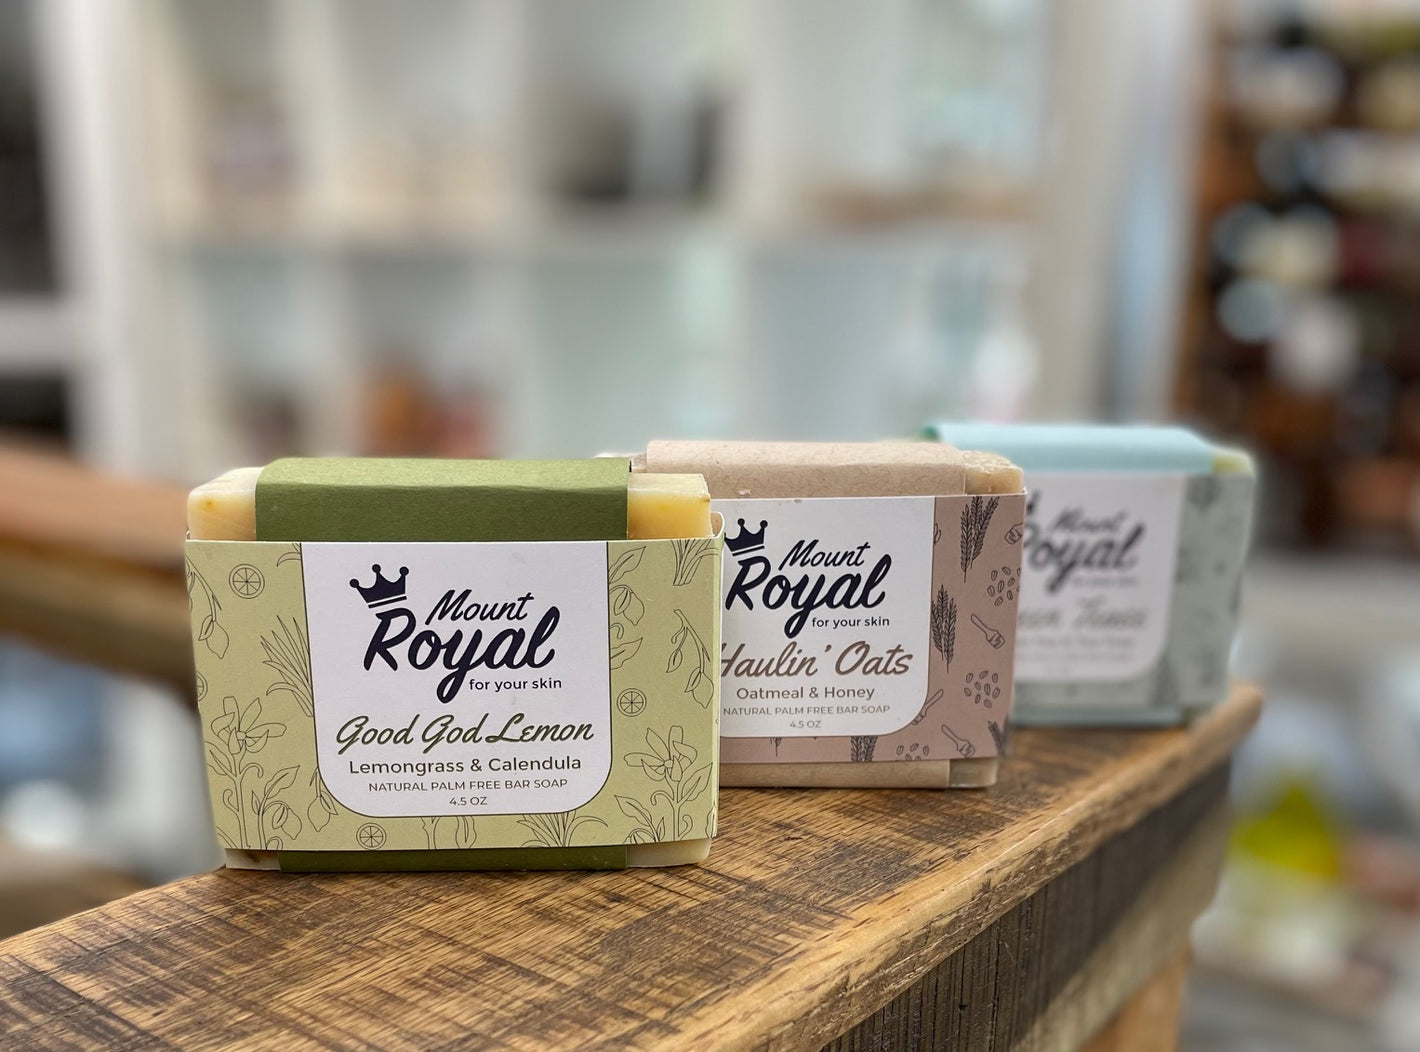 Image shows three soaps lined up. The soaps are yellow, brown and blue, and the scents printed on their labels are Lemon, Haulin' Oats and Green Teese